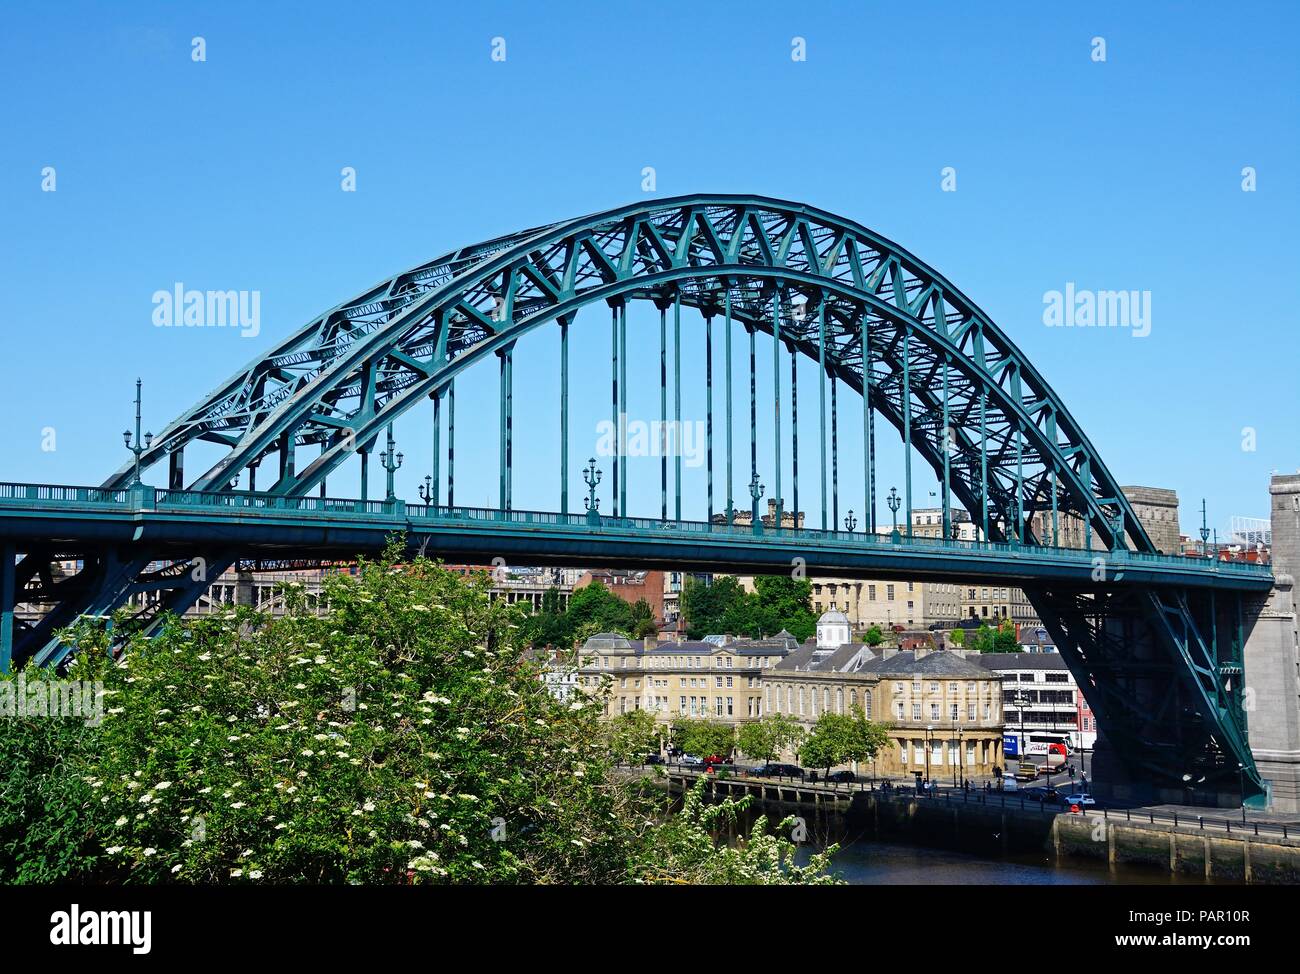 View of the Tyne Bridge across the River Tyne with city buildings to the rear seen from the Gateshead side of the river, Newcastle upon Tyne, Tyne and Stock Photo